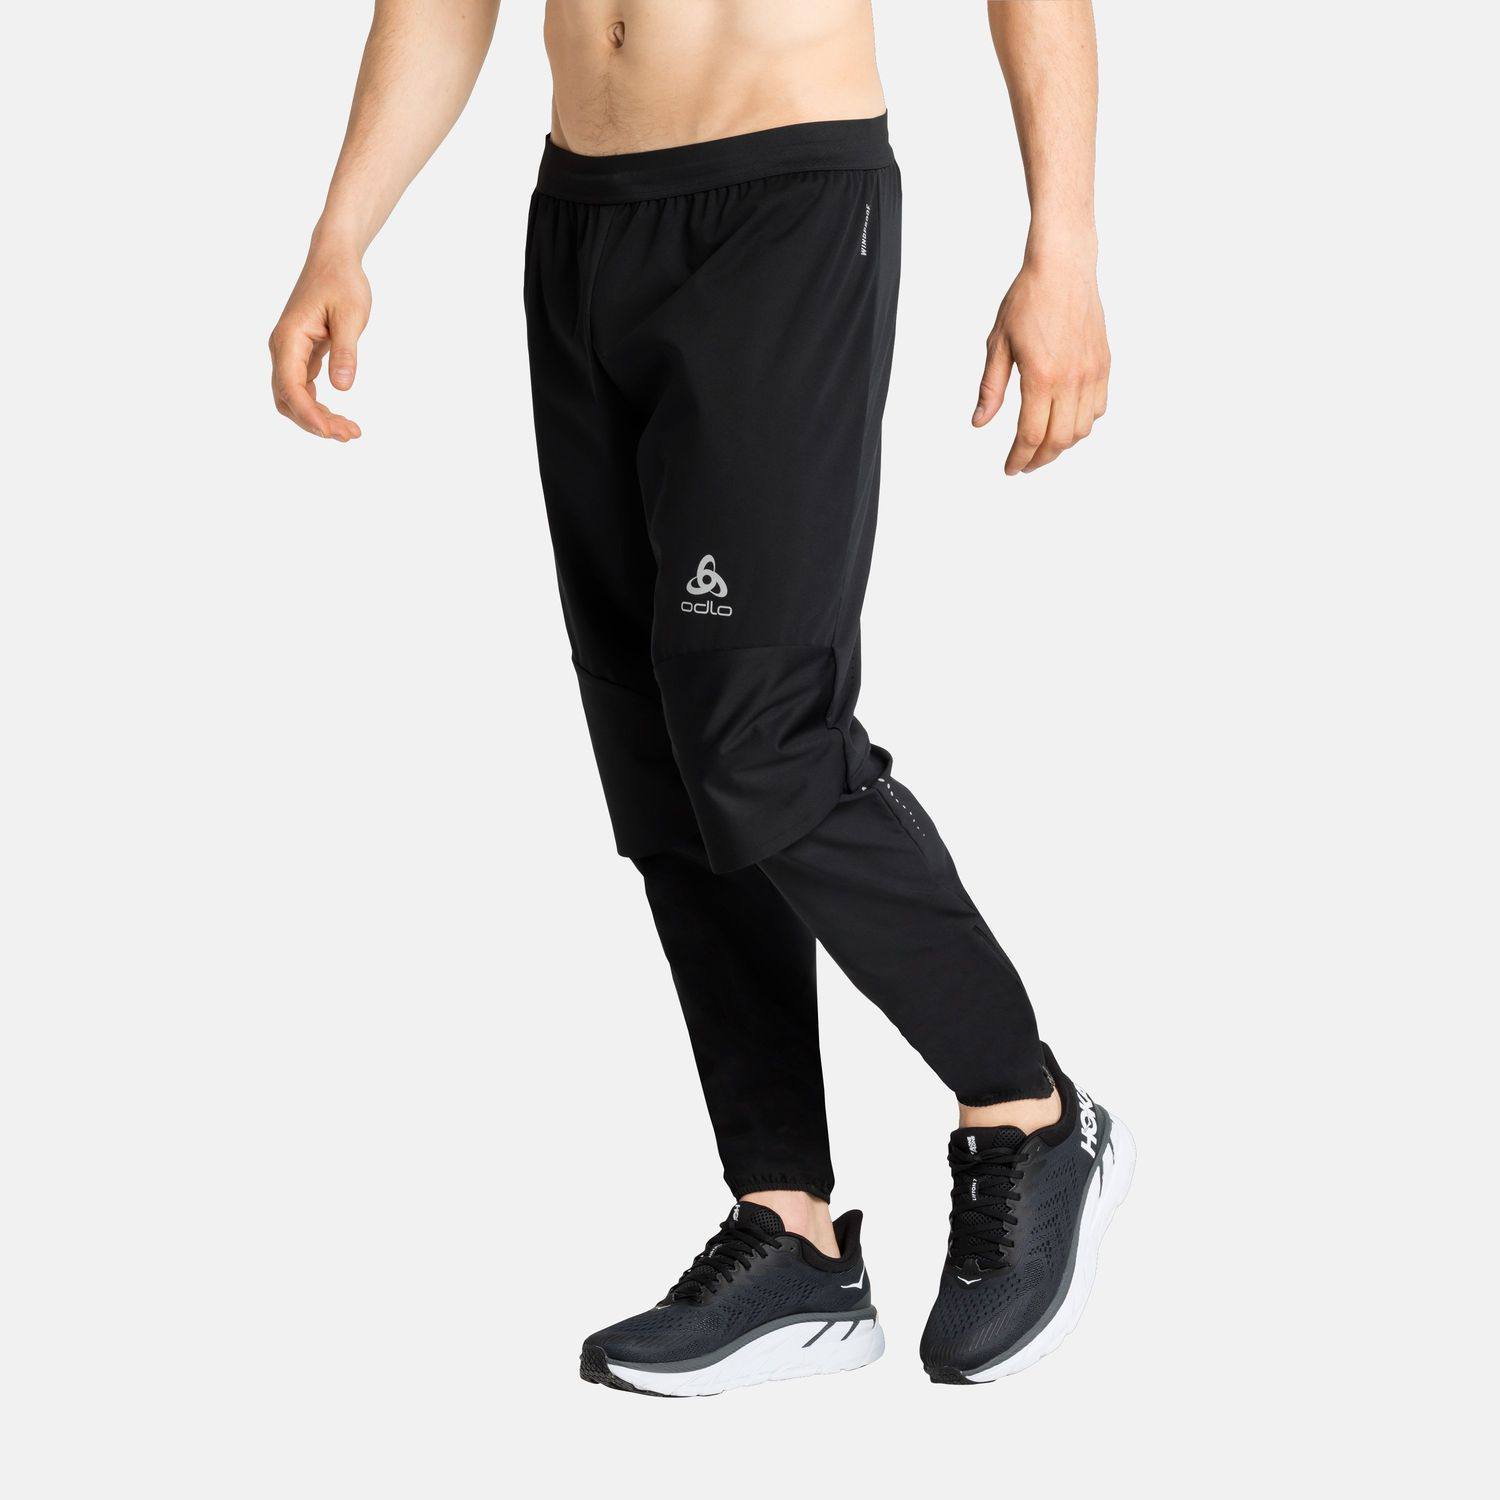 The Zeroweight Warm Pants Black M